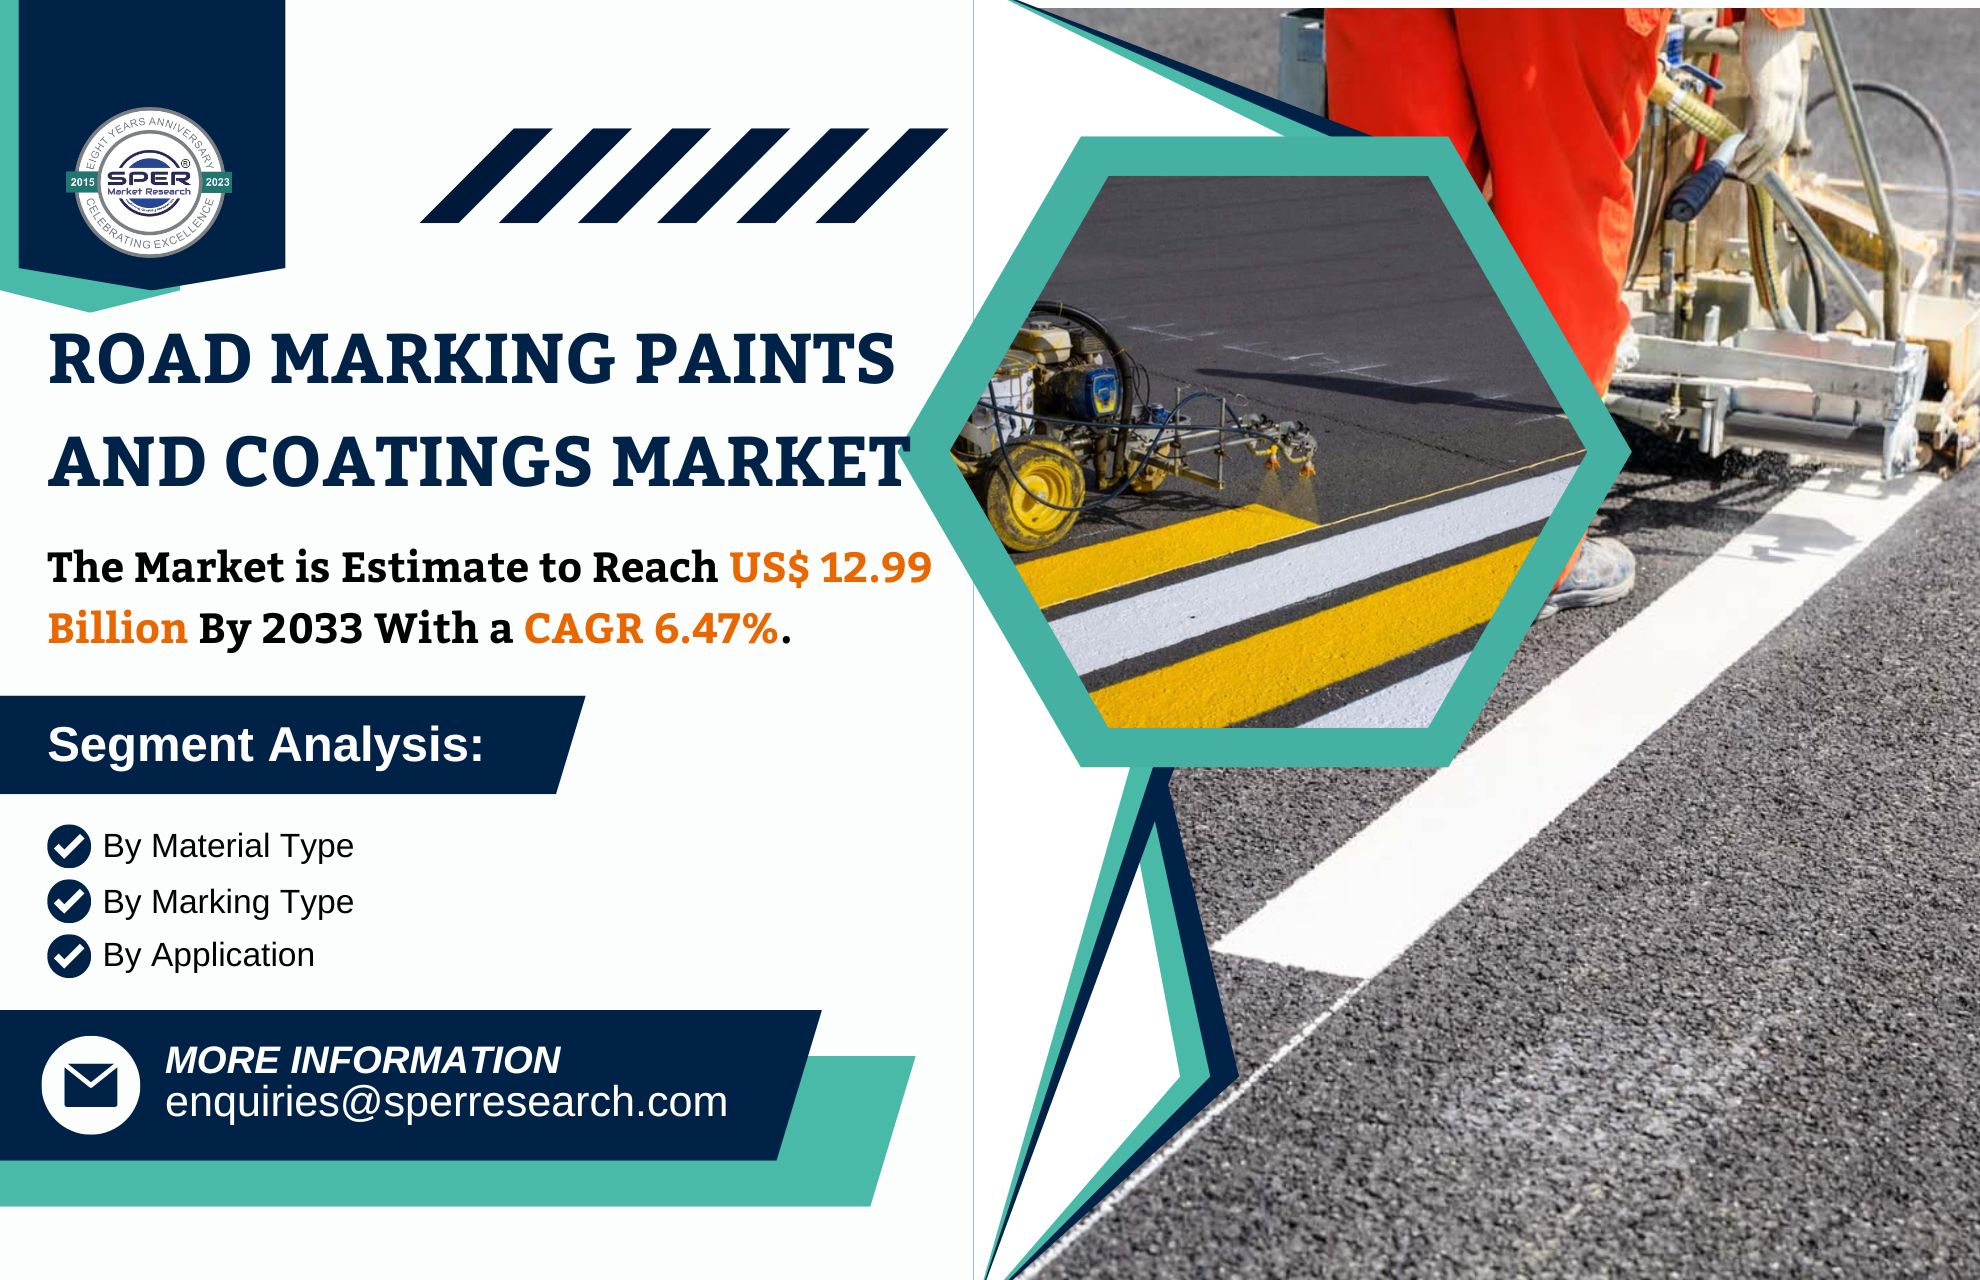 Road Marking Paints and Coatings Market